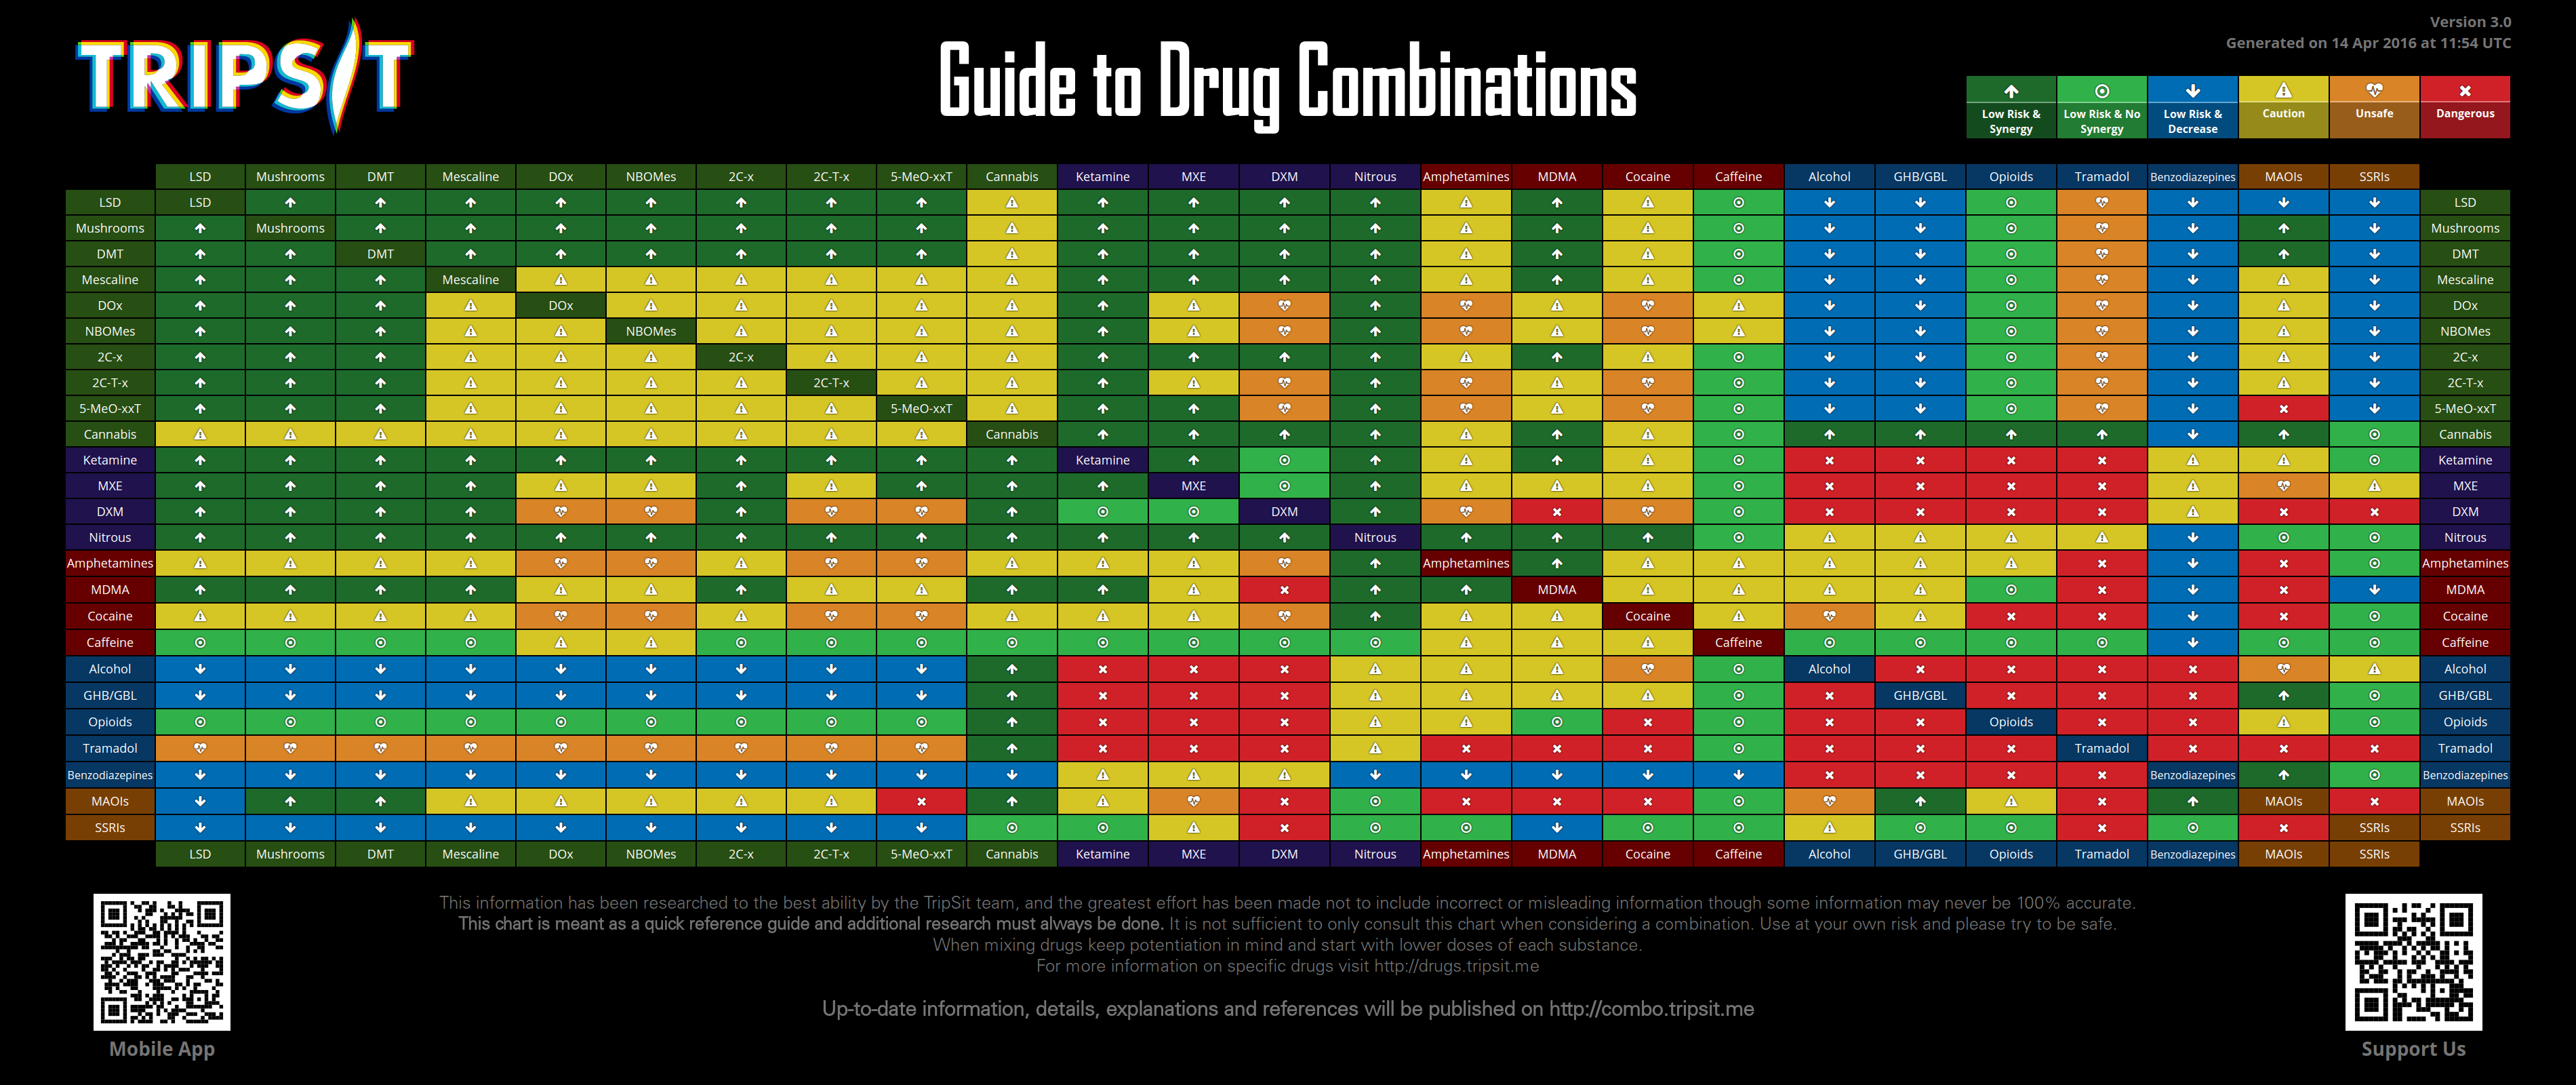 This chart helps you understand how different drug combinations work